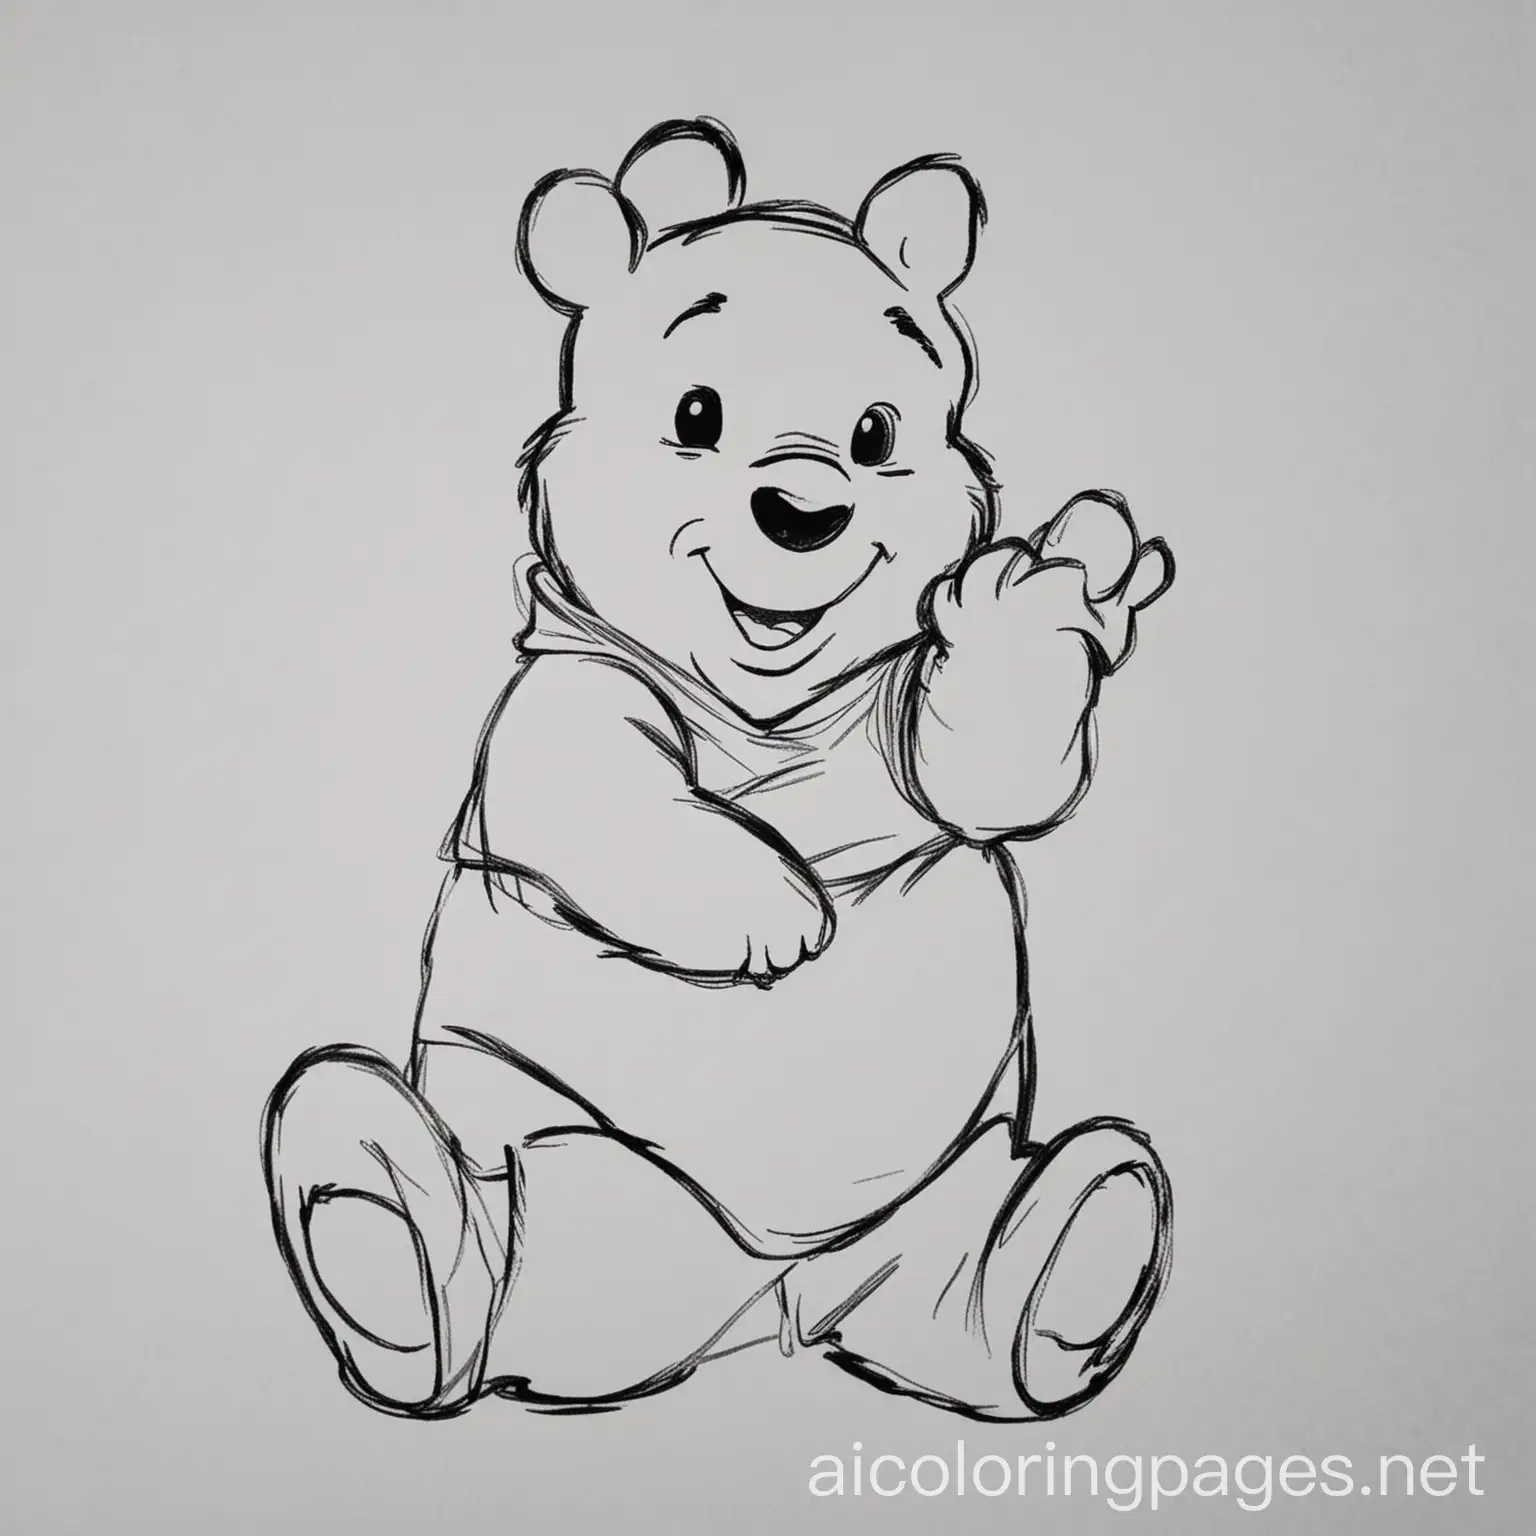 Disney Winnie the Pooh, Coloring Page, black and white, line art, white background, Simplicity, Ample White Space. The background of the coloring page is plain white to make it easy for young children to color within the lines. The outlines of all the subjects are easy to distinguish, making it simple for kids to color without too much difficulty